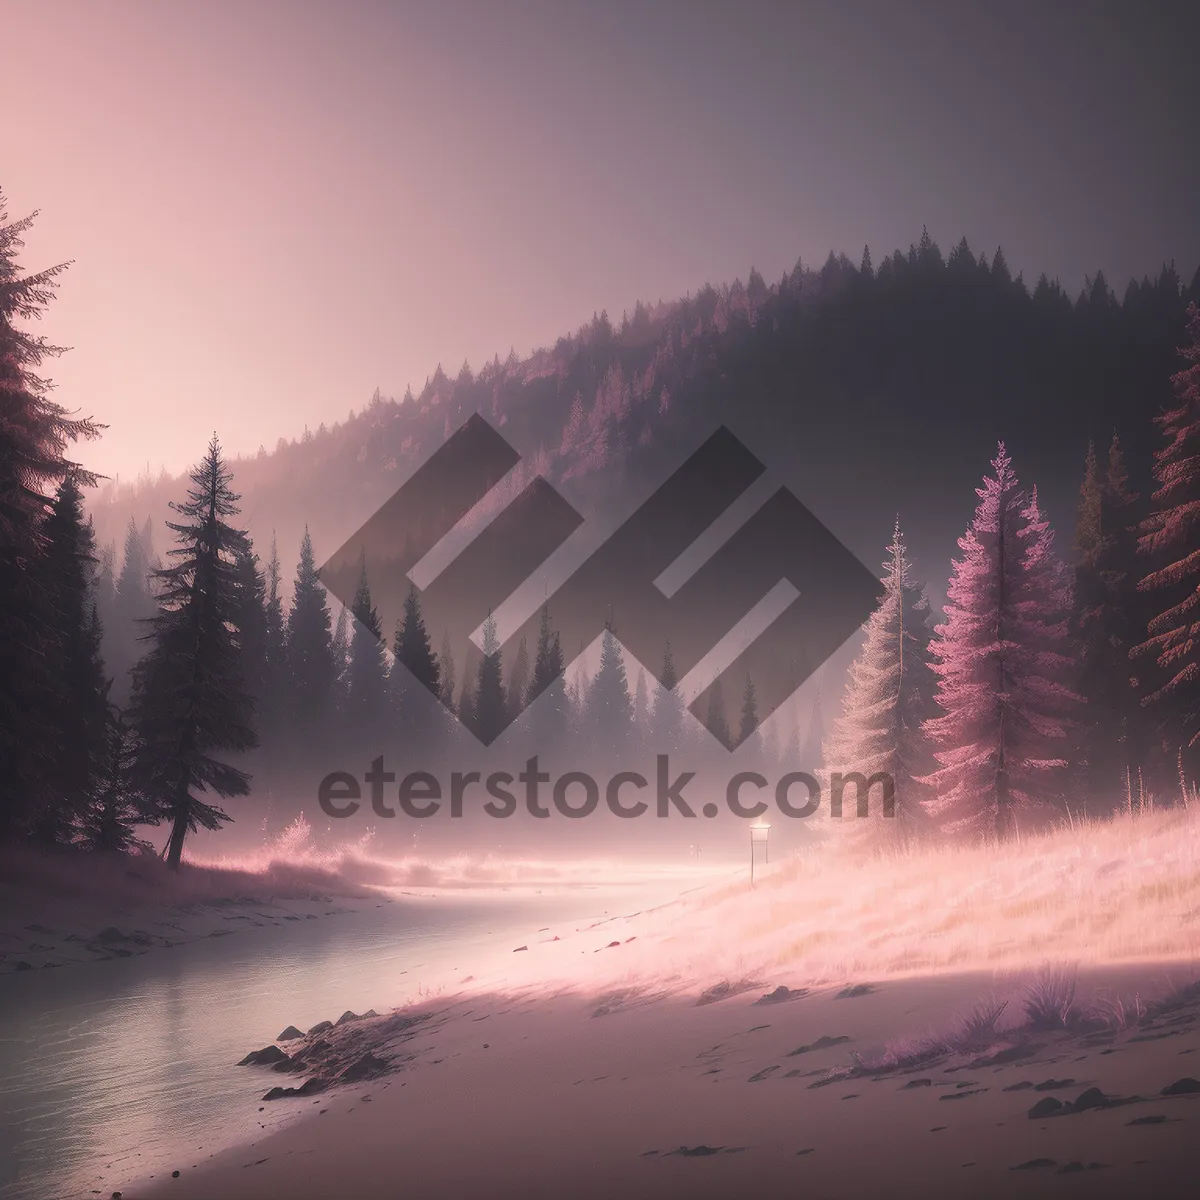 Picture of Picturesque Winter Wonderland: Majestic Snowy Mountain Landscape